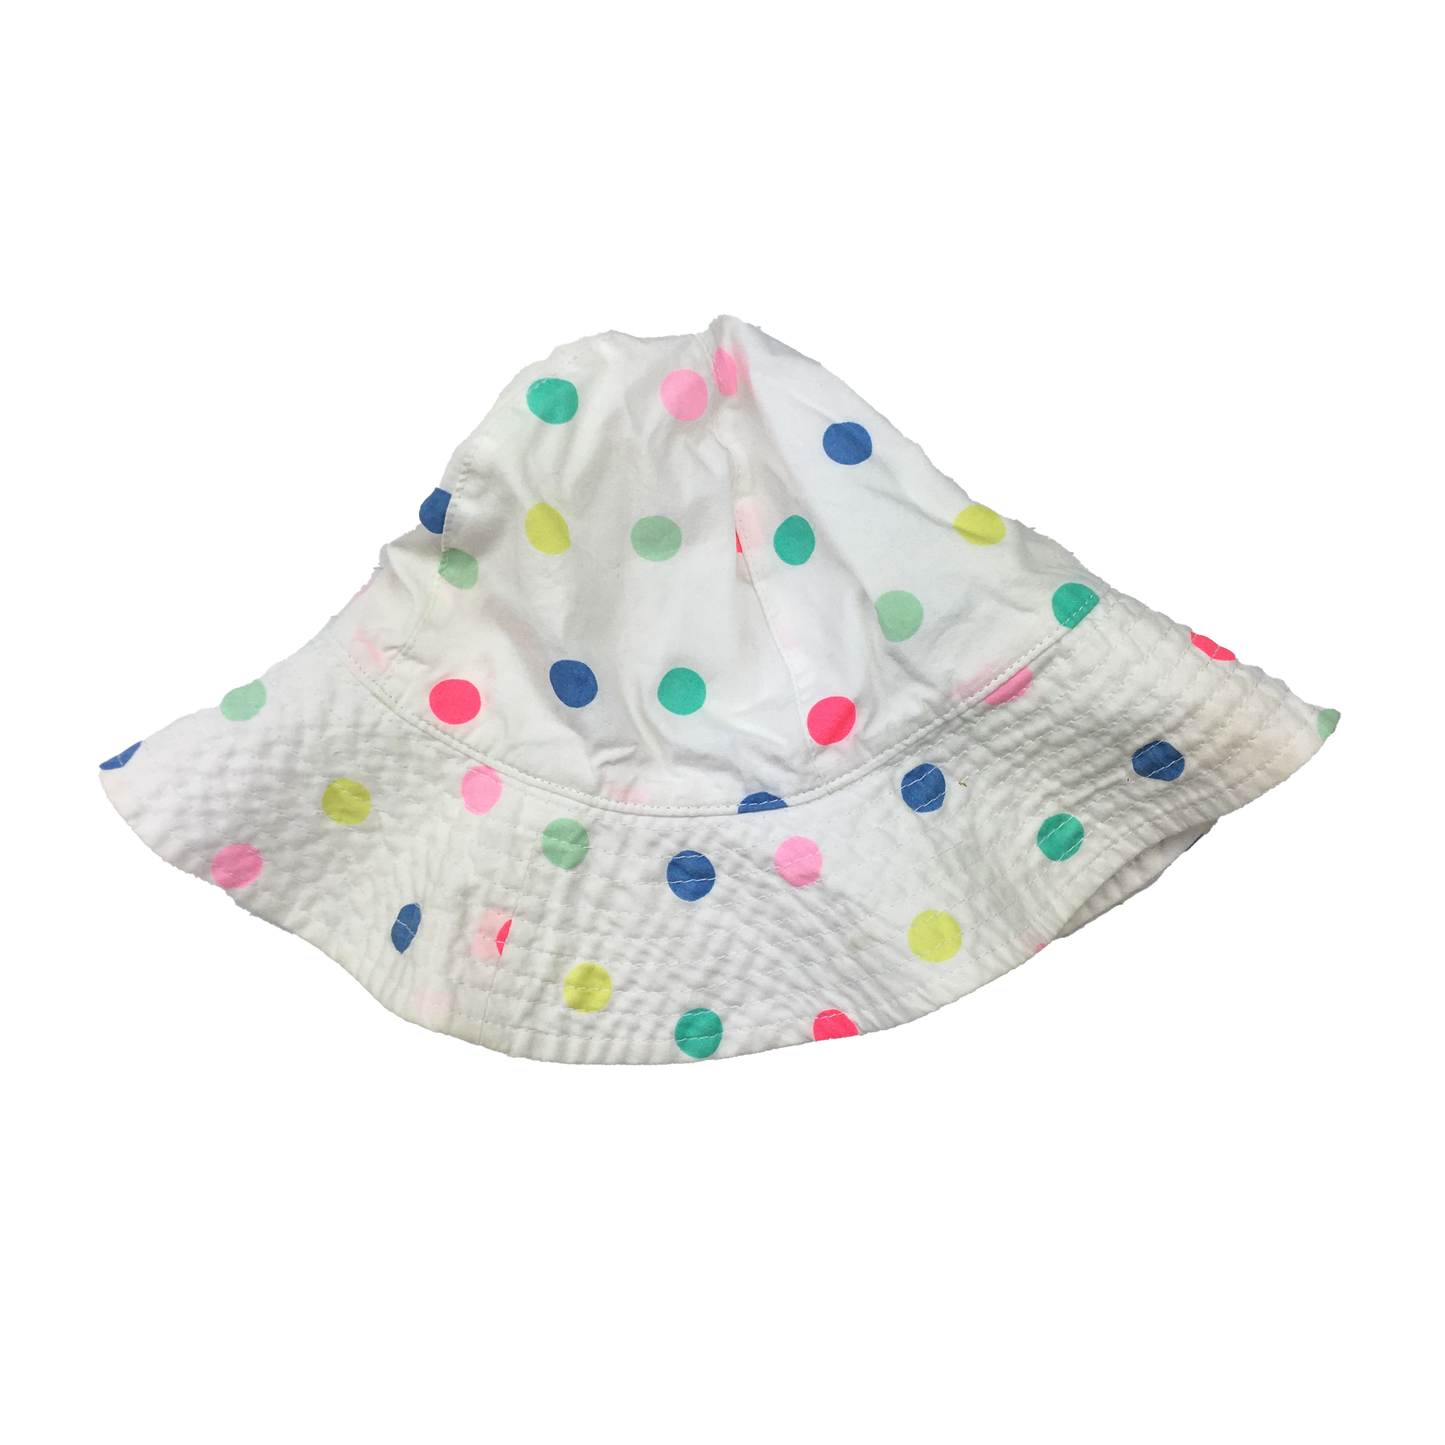 Carter's White Sun Hat with Polka Dots 12-24M